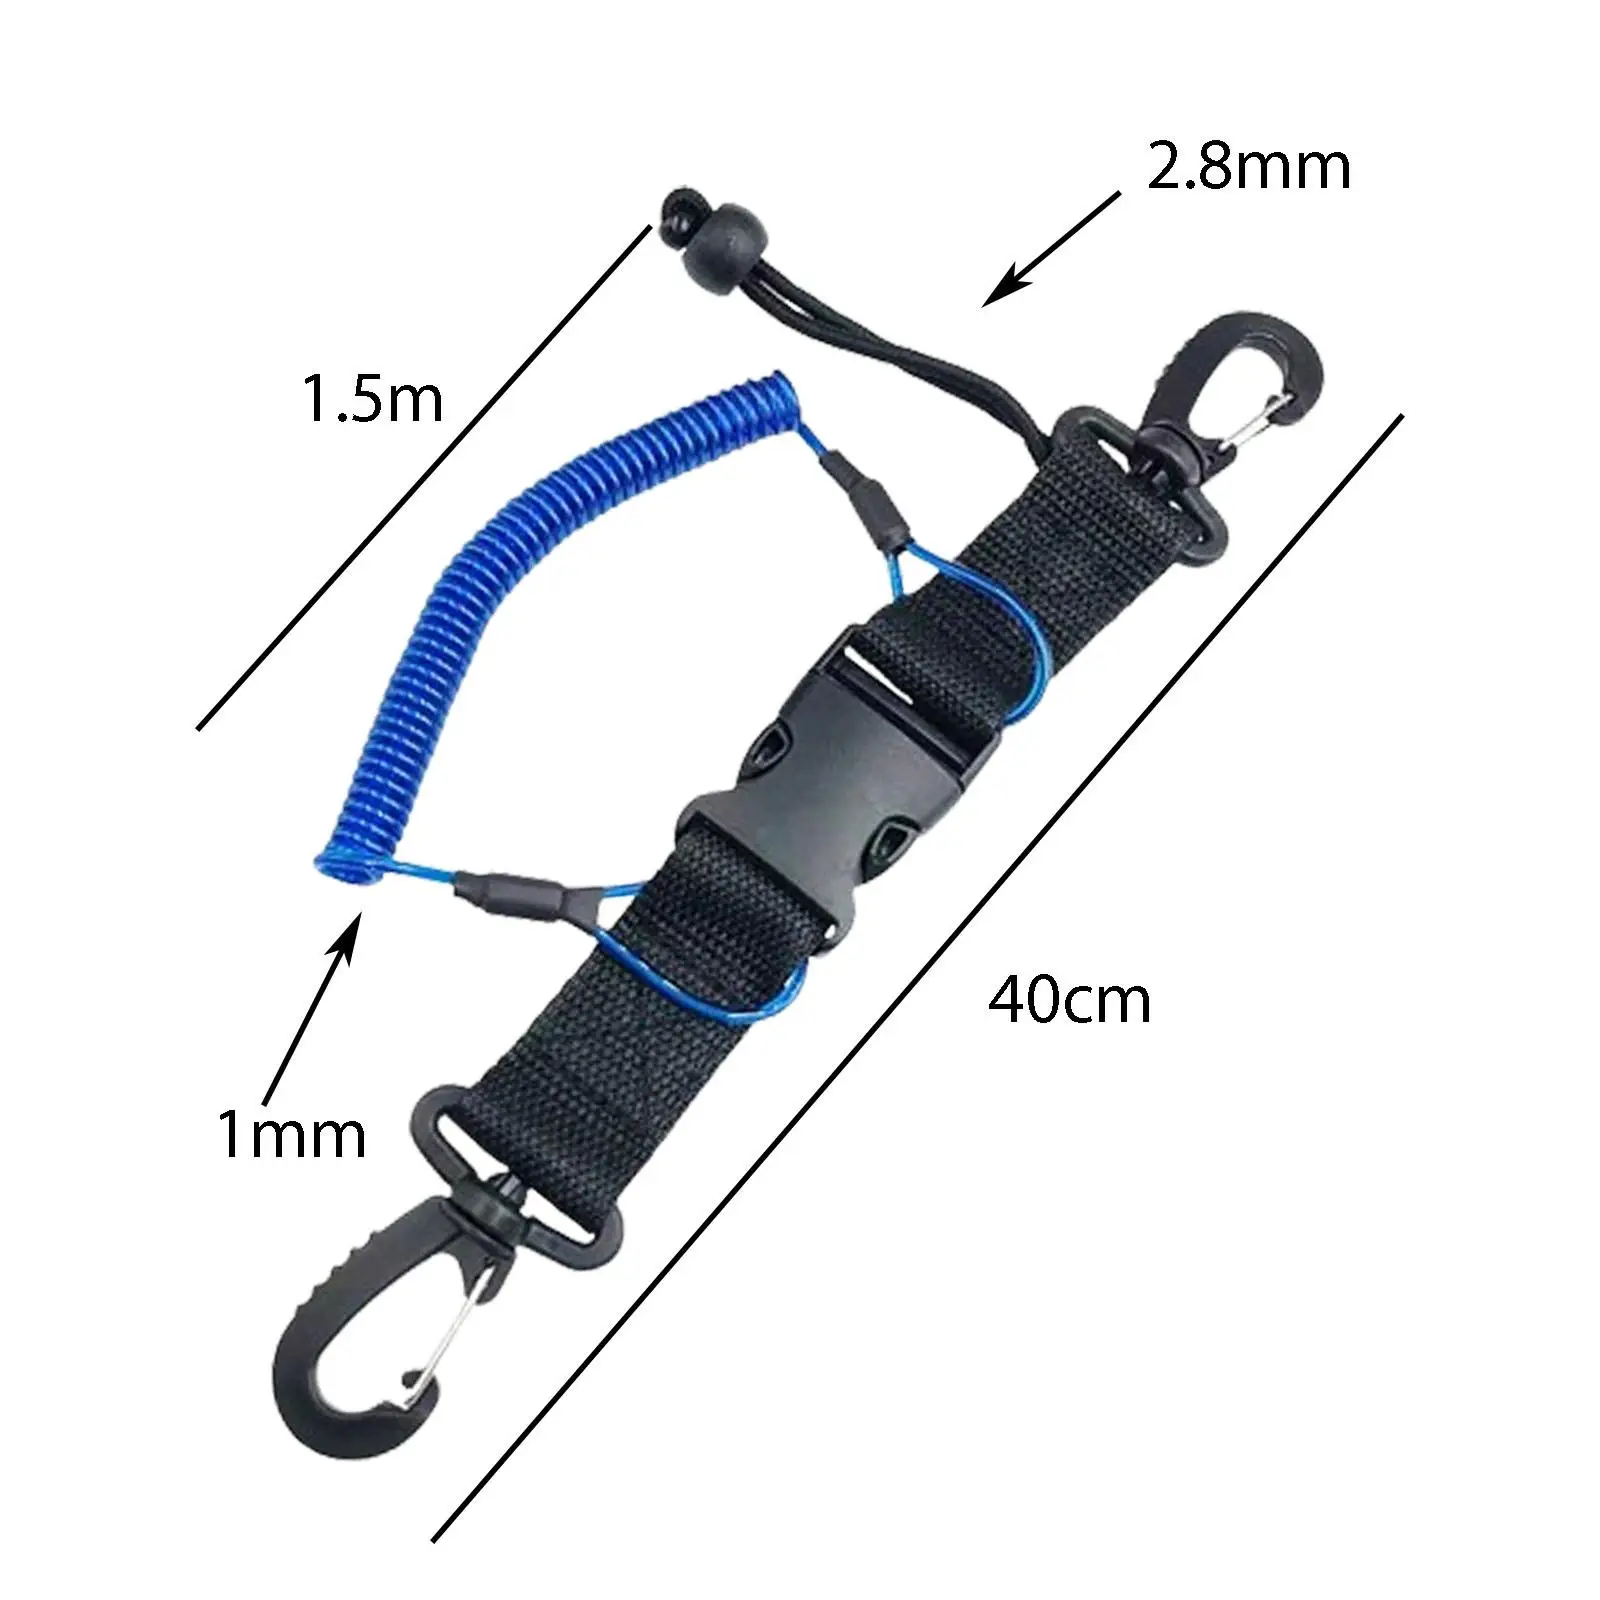 Scuba Diving Lanyard Wrist Lanyard Anti Lost Lightweight Dive Clip for Underwater Snorkeling Water Sports Diving Cameras